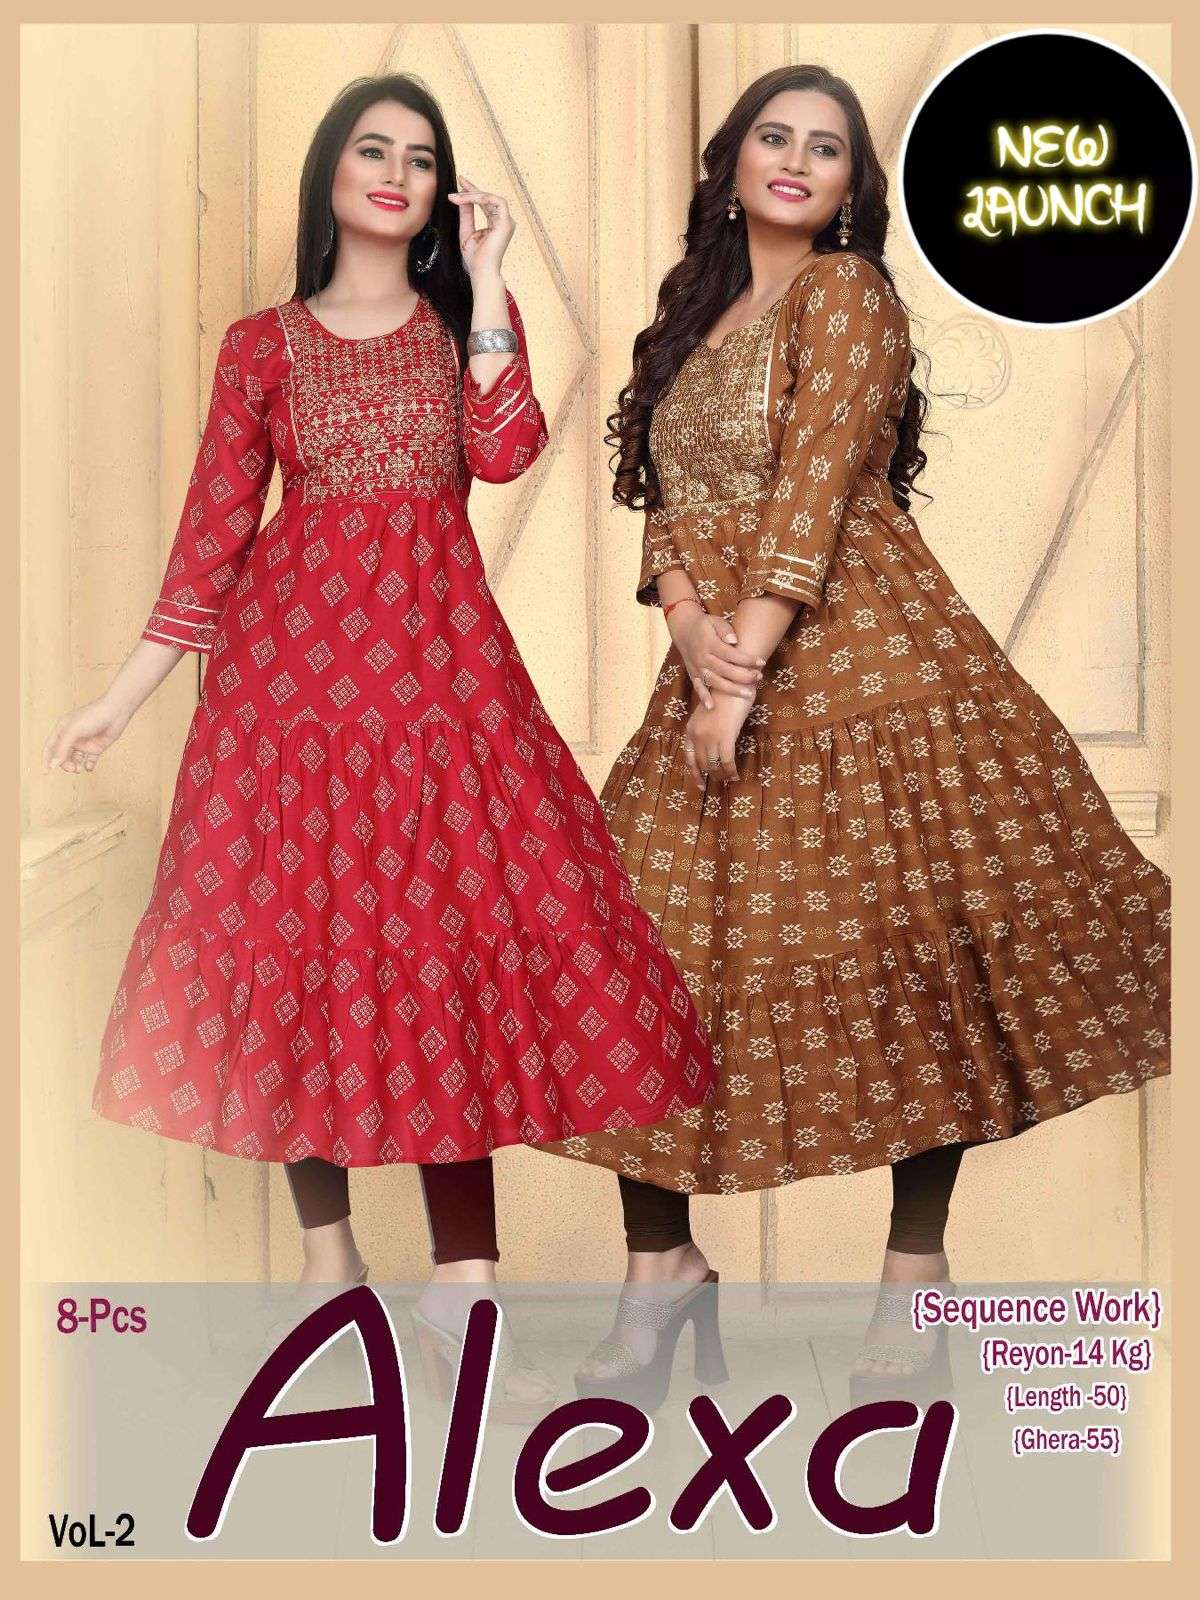 Beauty Alexa Vol 2 Rayon 14 Kg Heavy Sequence Work Gown Kurti Length 50 and Ghera 60 with Lace Pattern KURTI CATALOG WHOLESALER BEST RATE